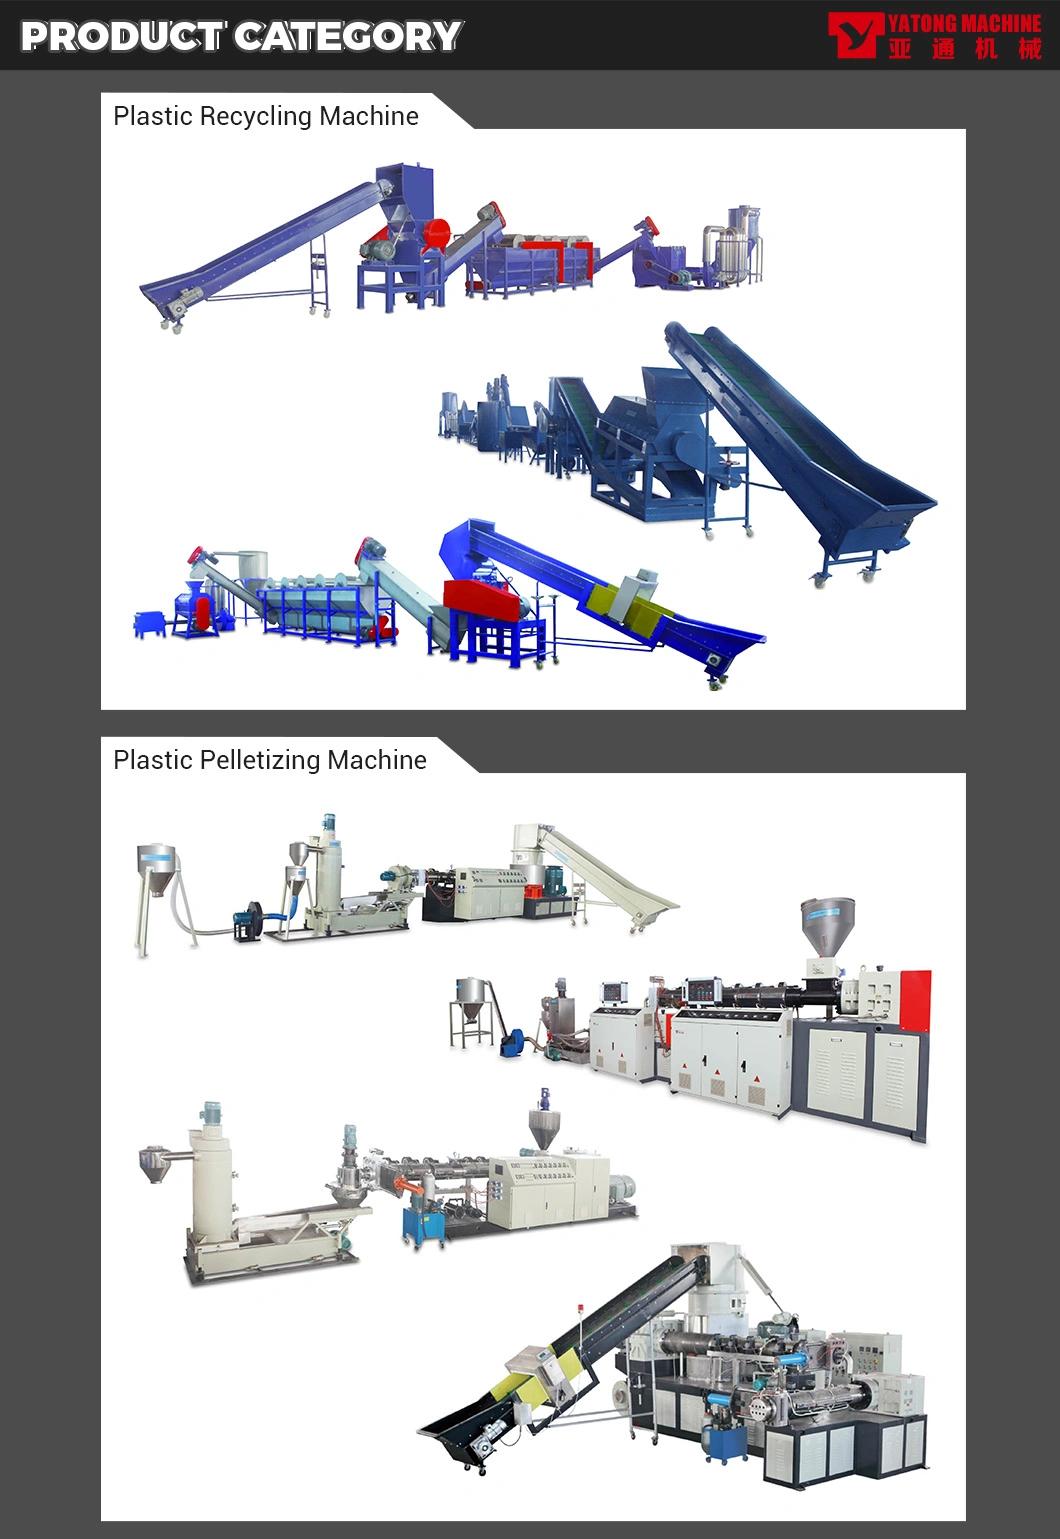 Yatong Plastic Milling Pulverizer Machine with CE ISO9001: 2008